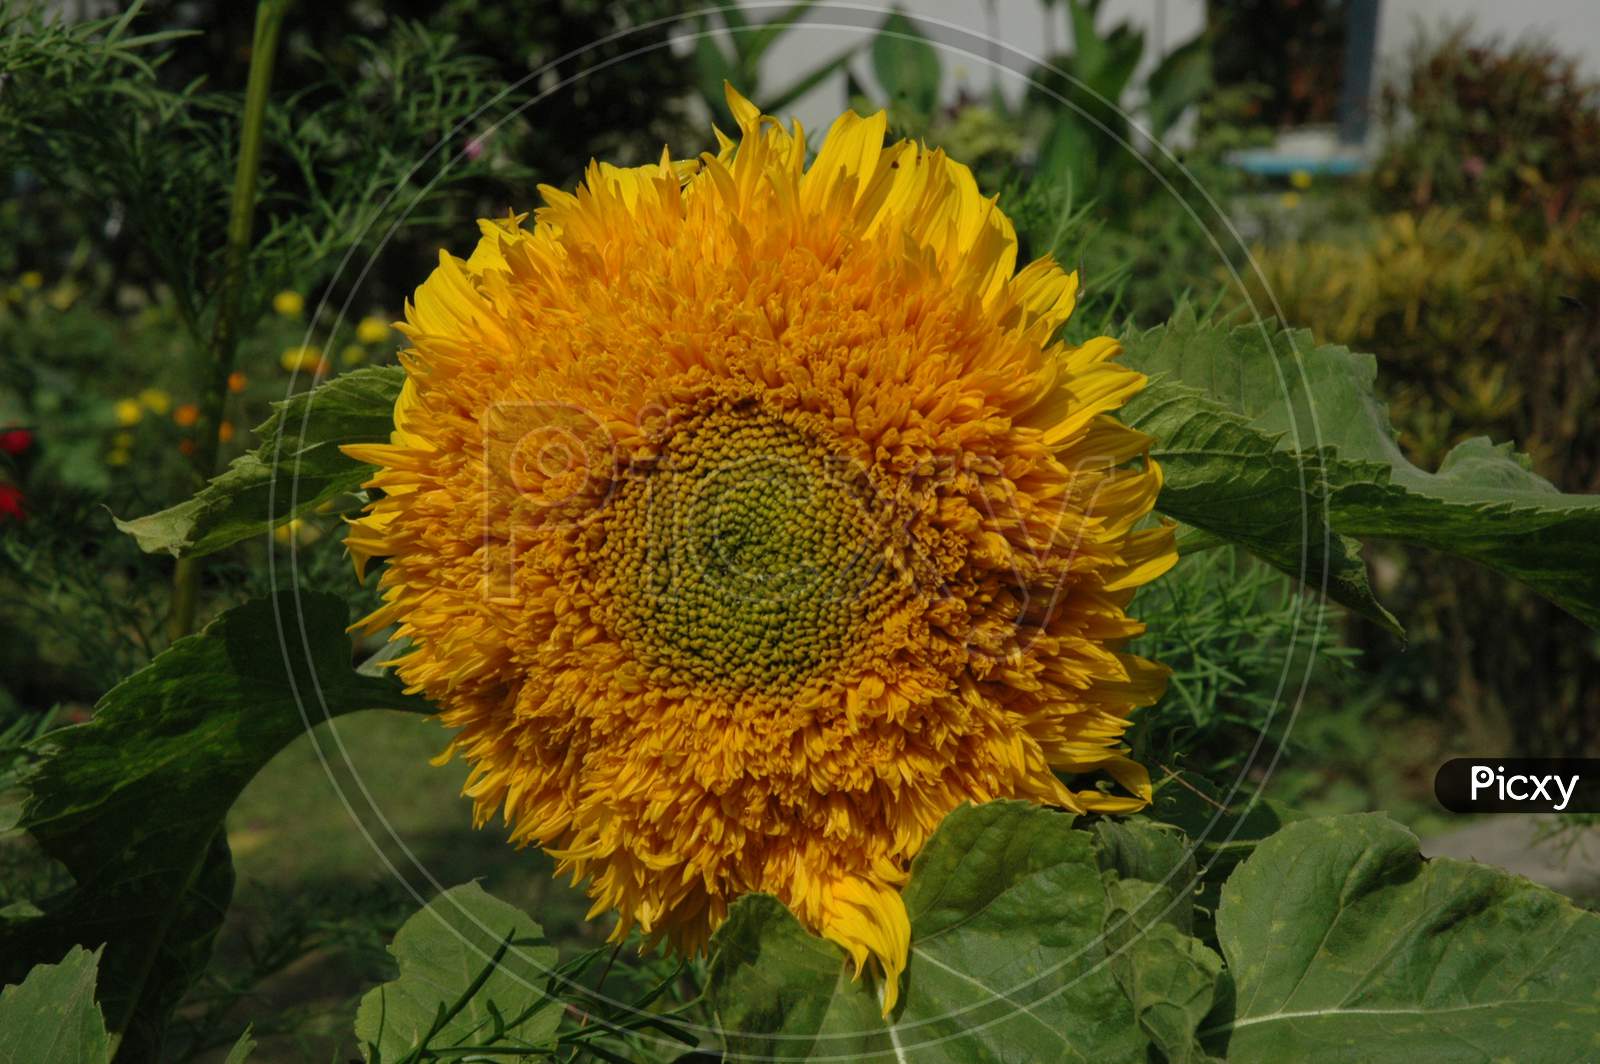 SunFlowers Blooming on Plants  in an House Garden